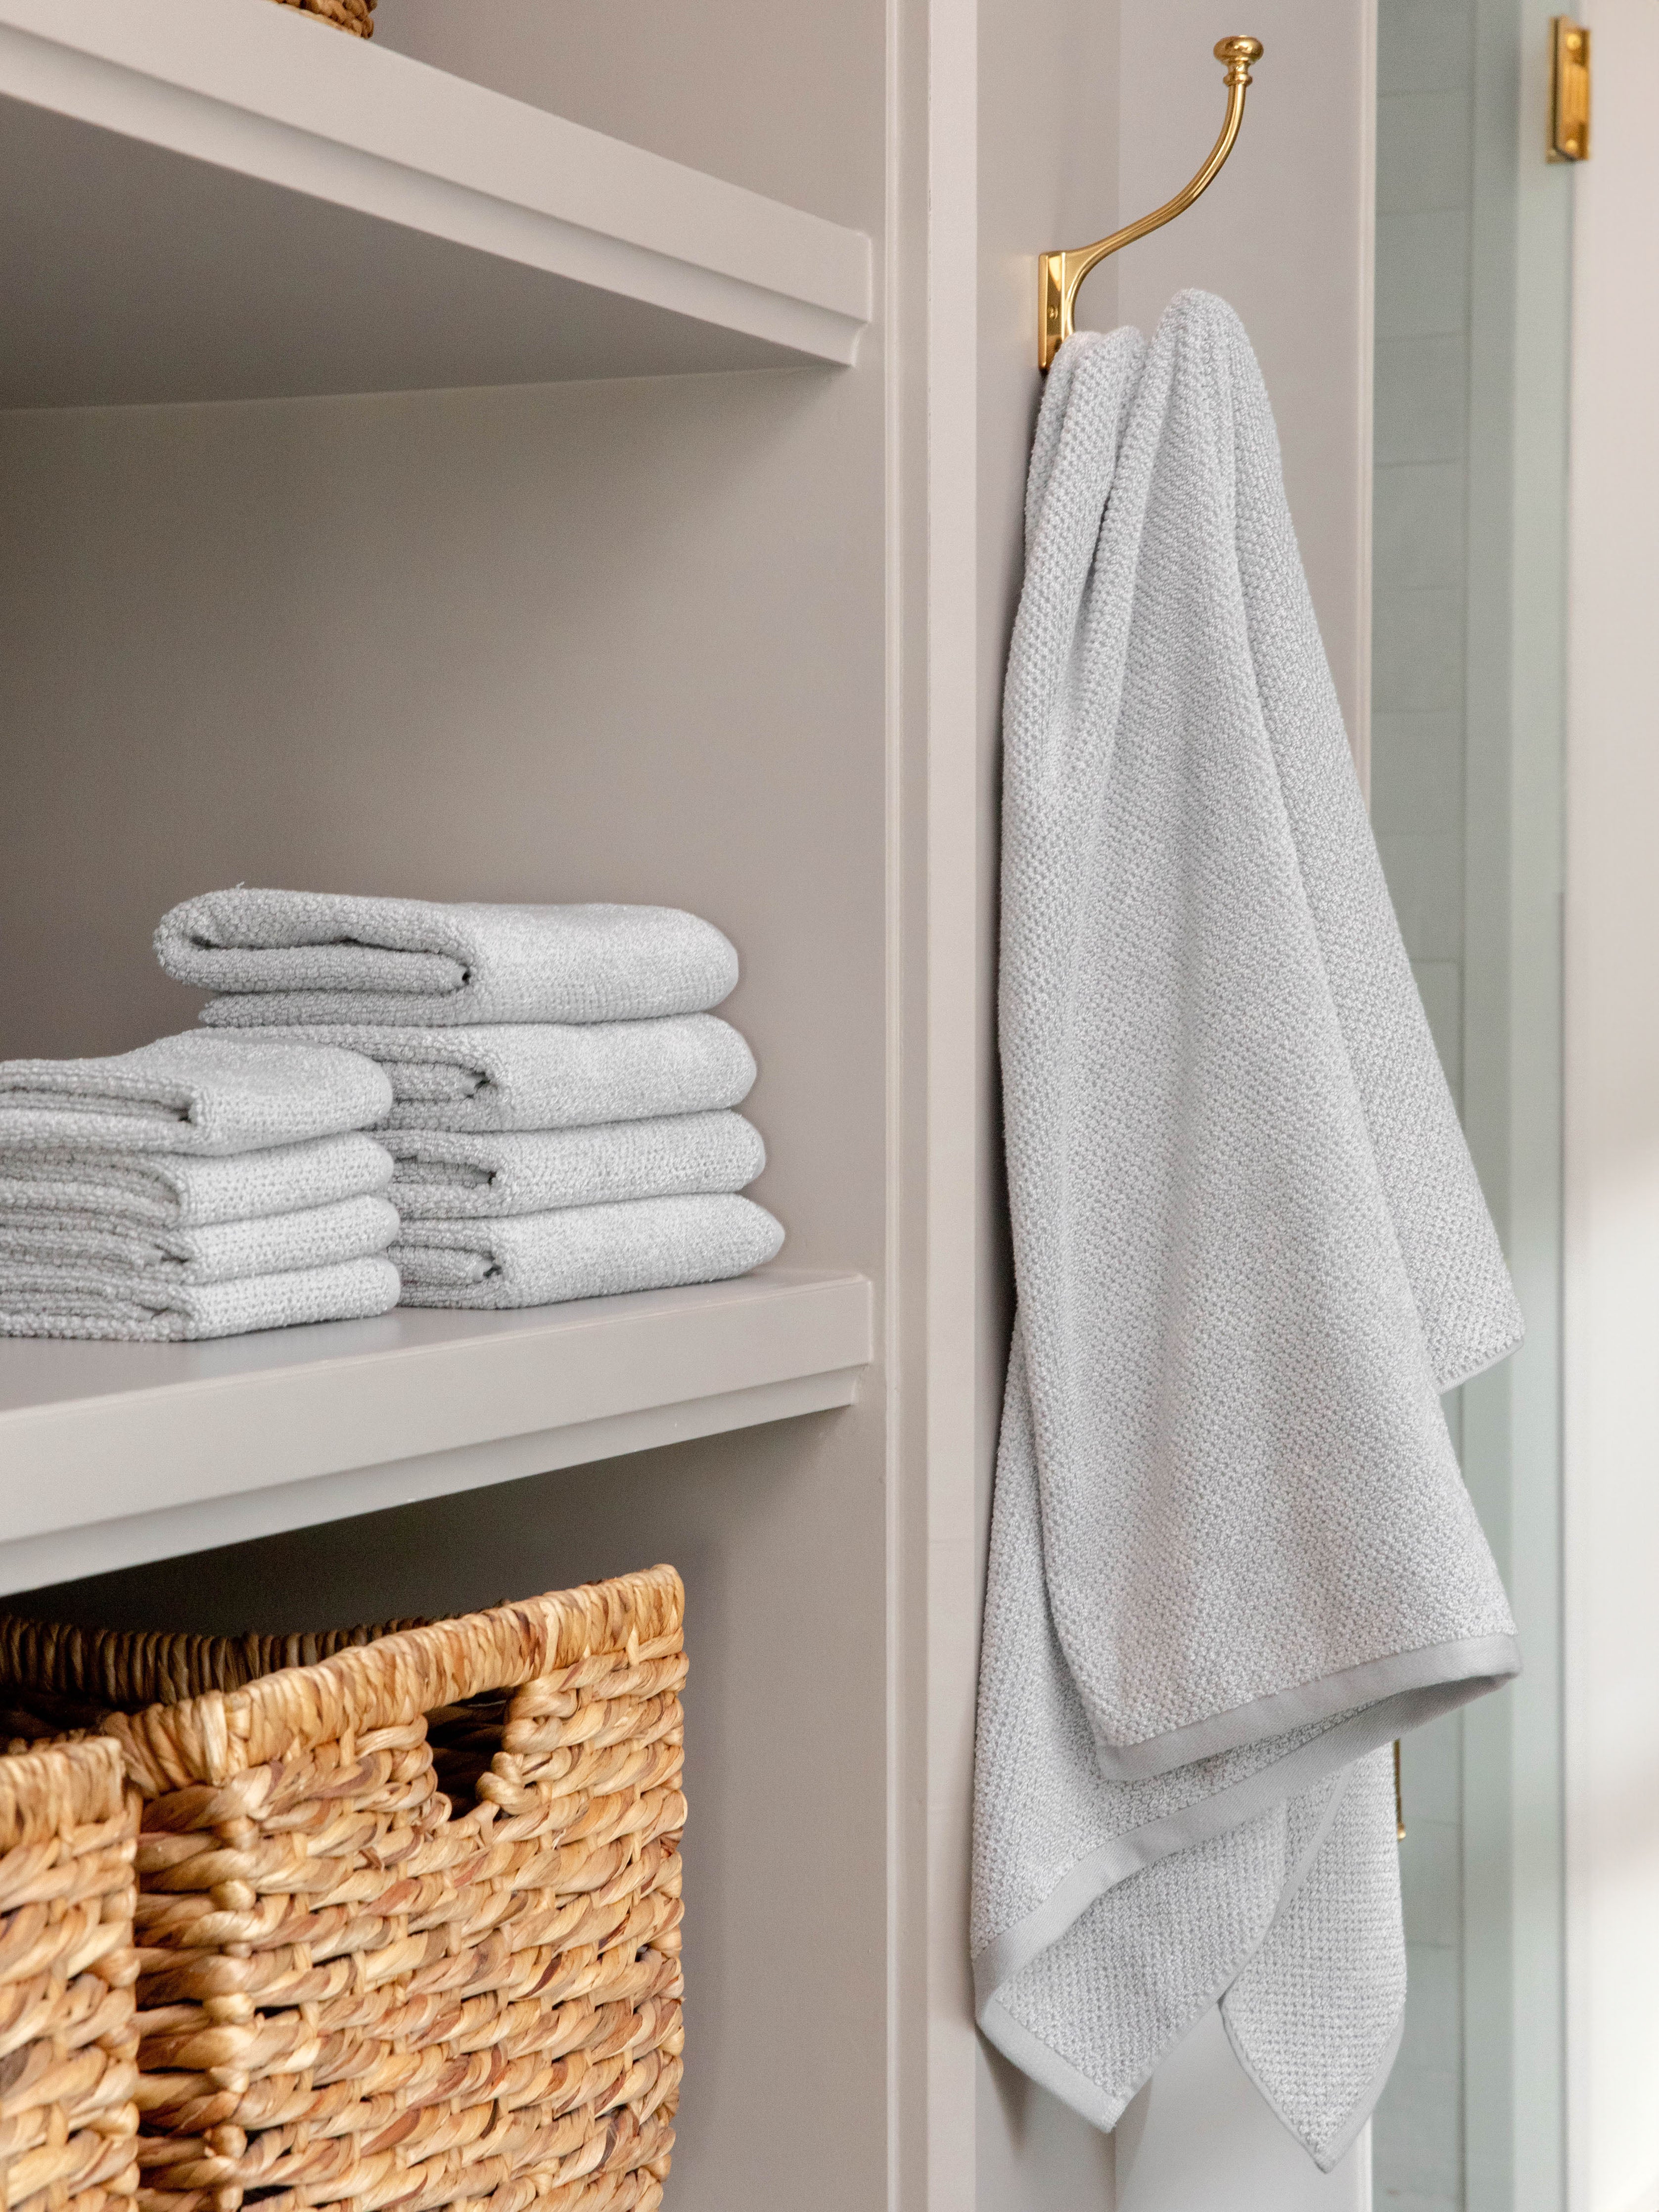 Nantucket Bath Sheets in the color Heathered Harbor Mist. Photo of Nantucket Bath Sheets taken as Nantucket hand towels, wash clothes, and bath towels are neatly placed on shelves in a bathroom. |Color: Heathered Harbor Mist